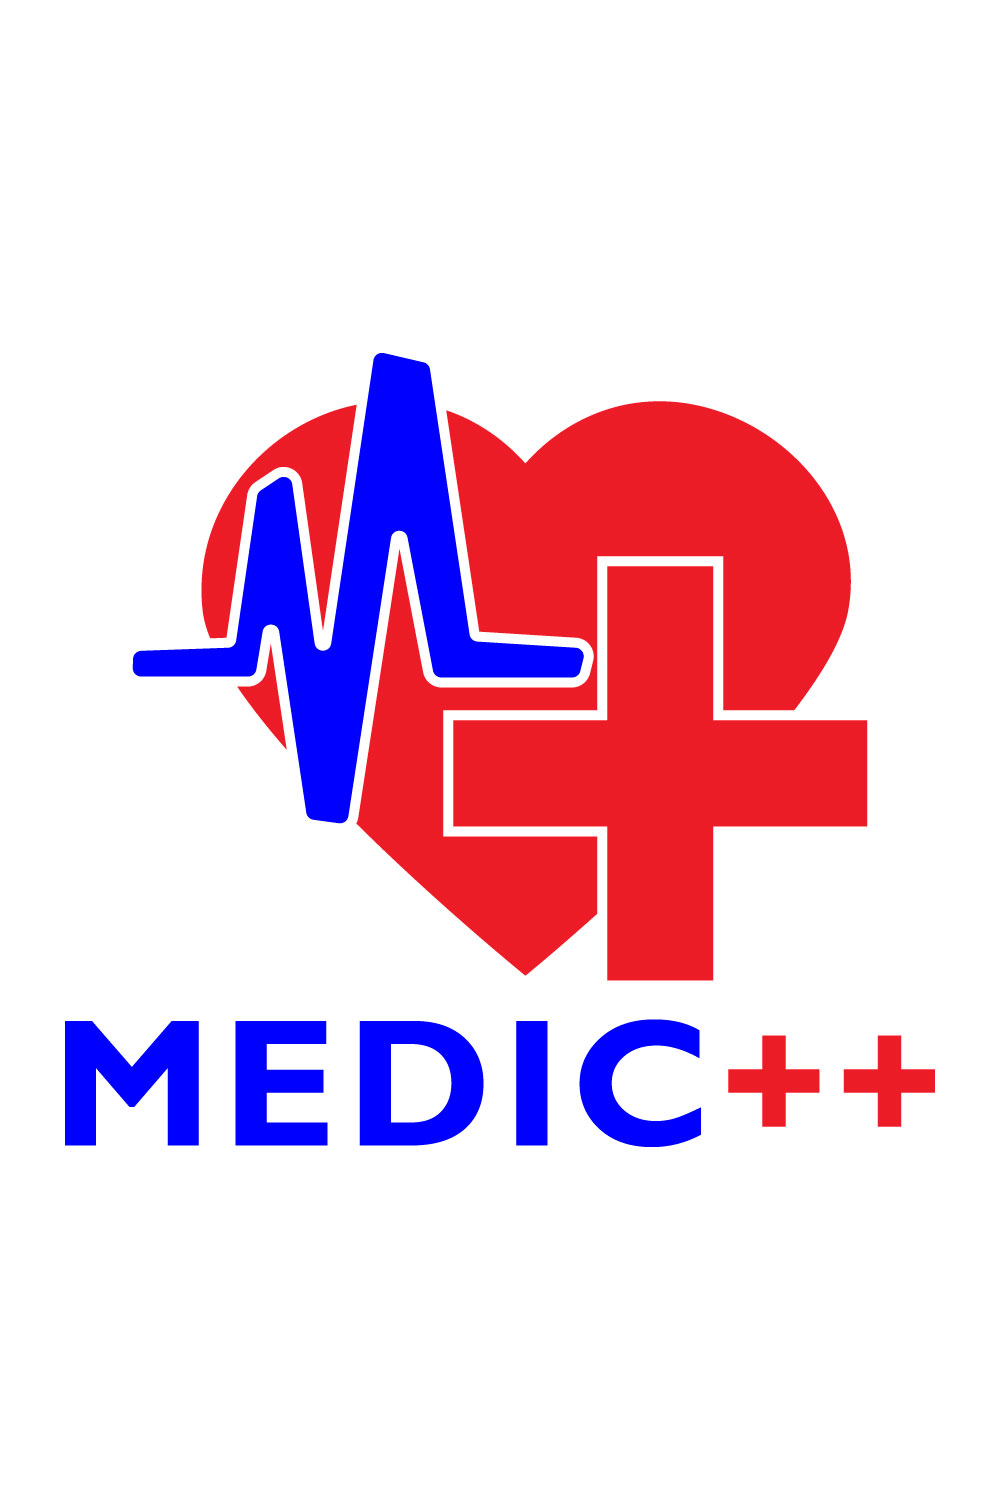 MEDIC++ pinterest preview image.